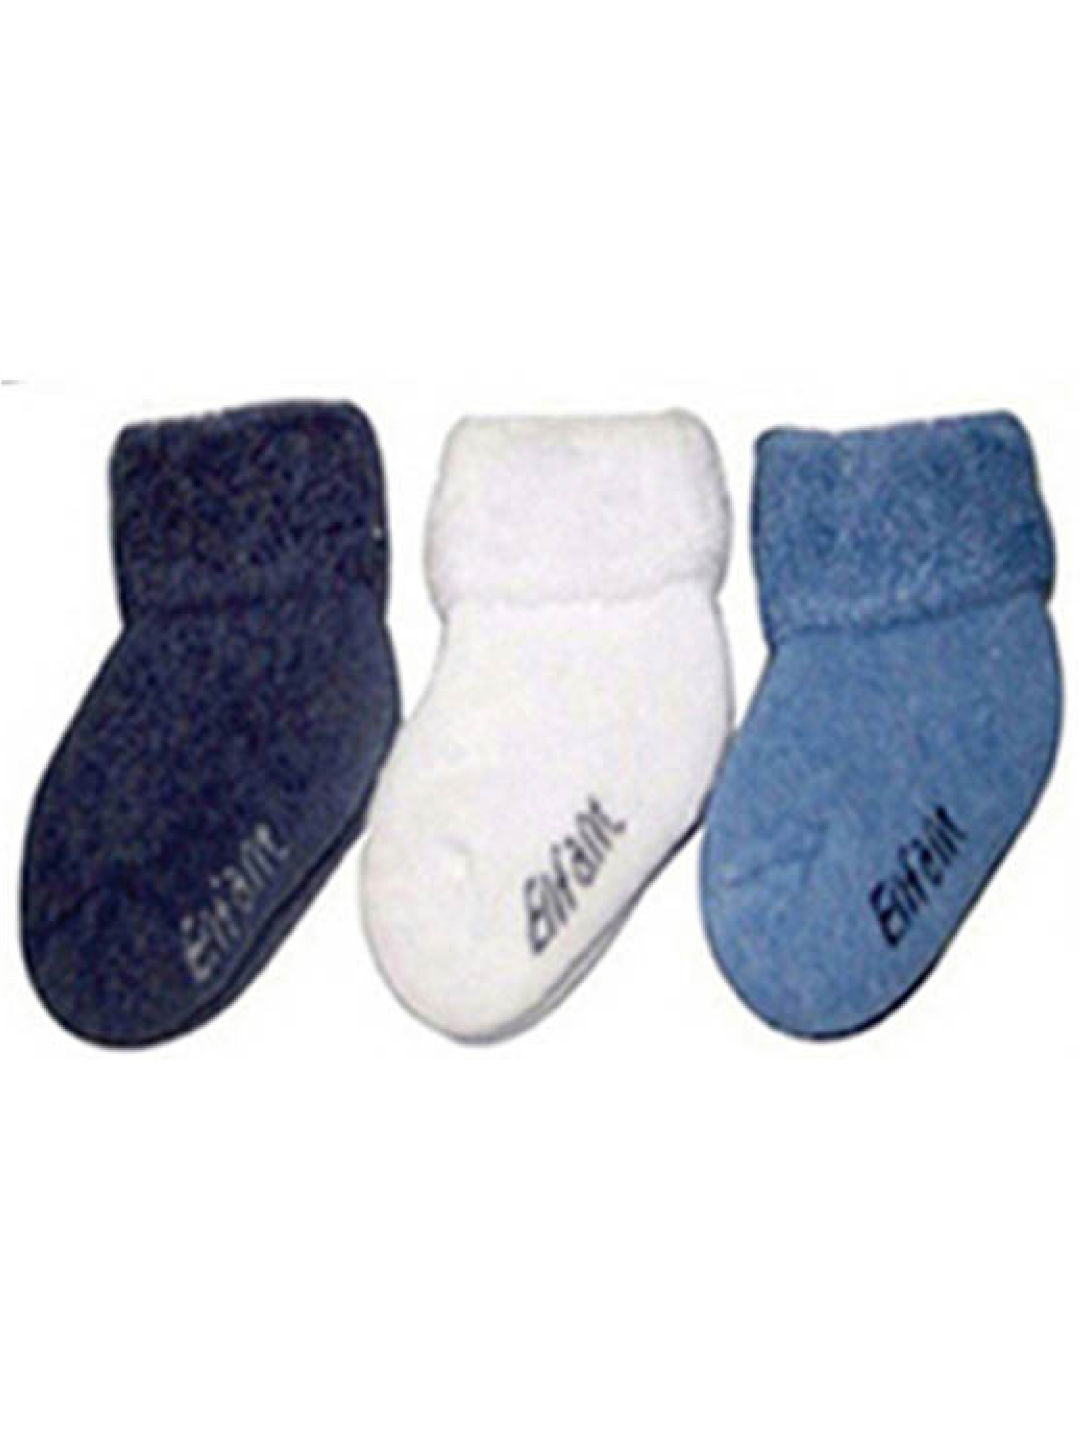 Enfant Thick Terry Socks (3 Pairs)